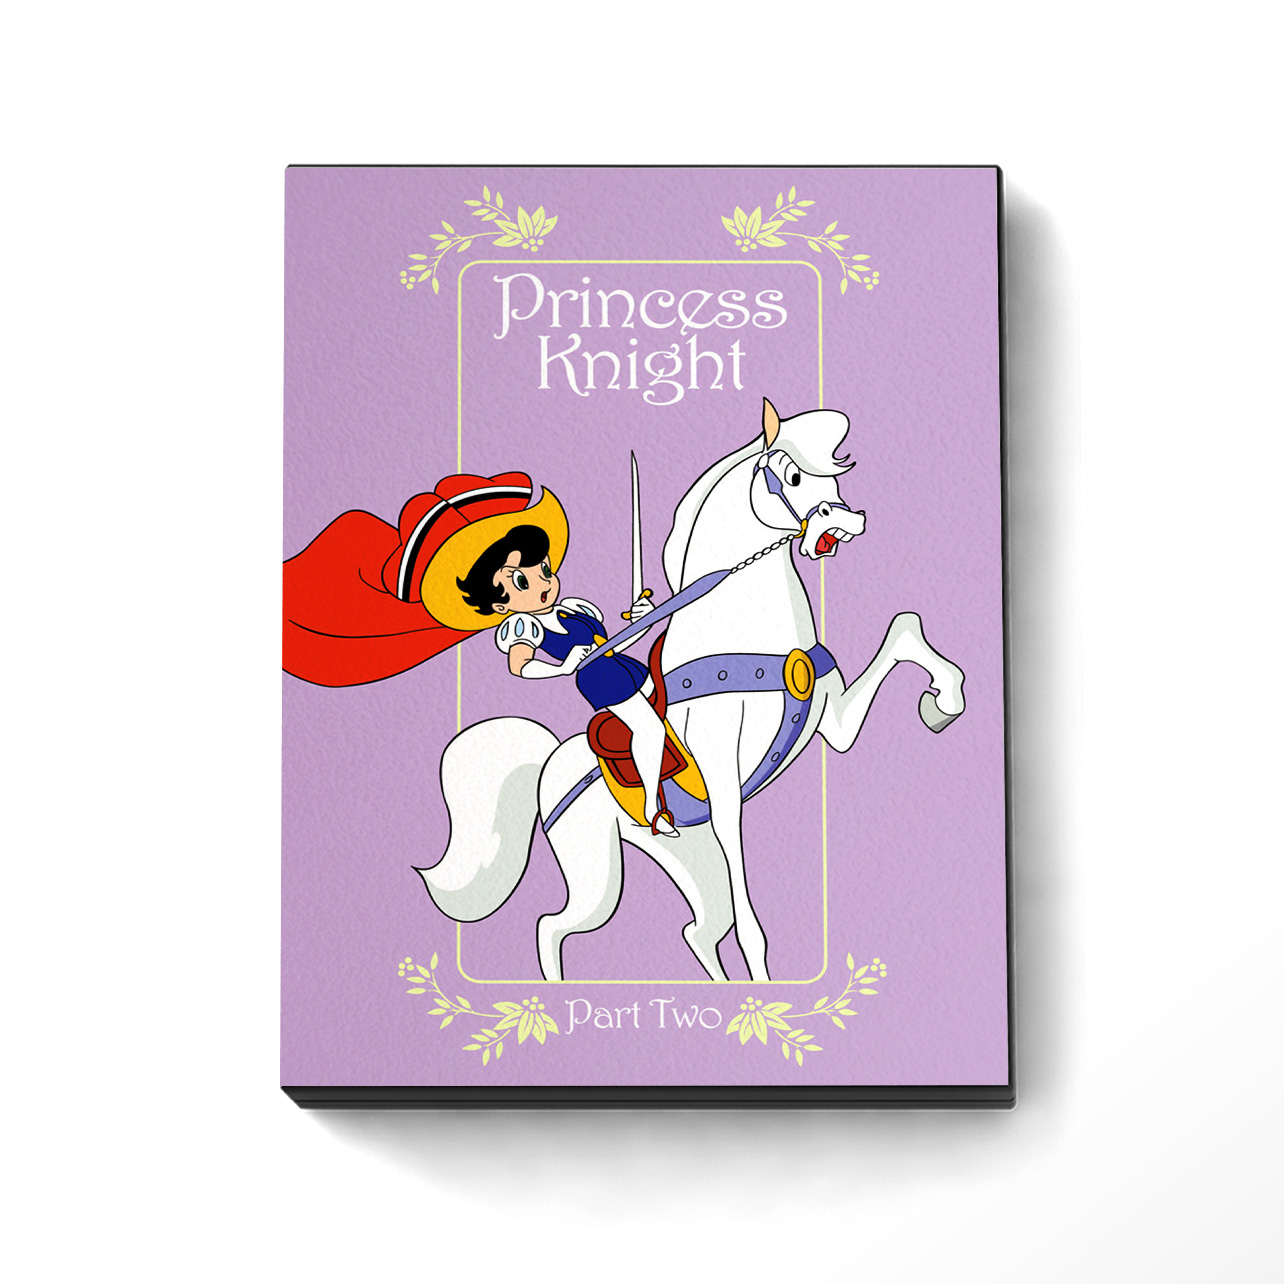 Princess Knight - Part 2 - DVD image count 0